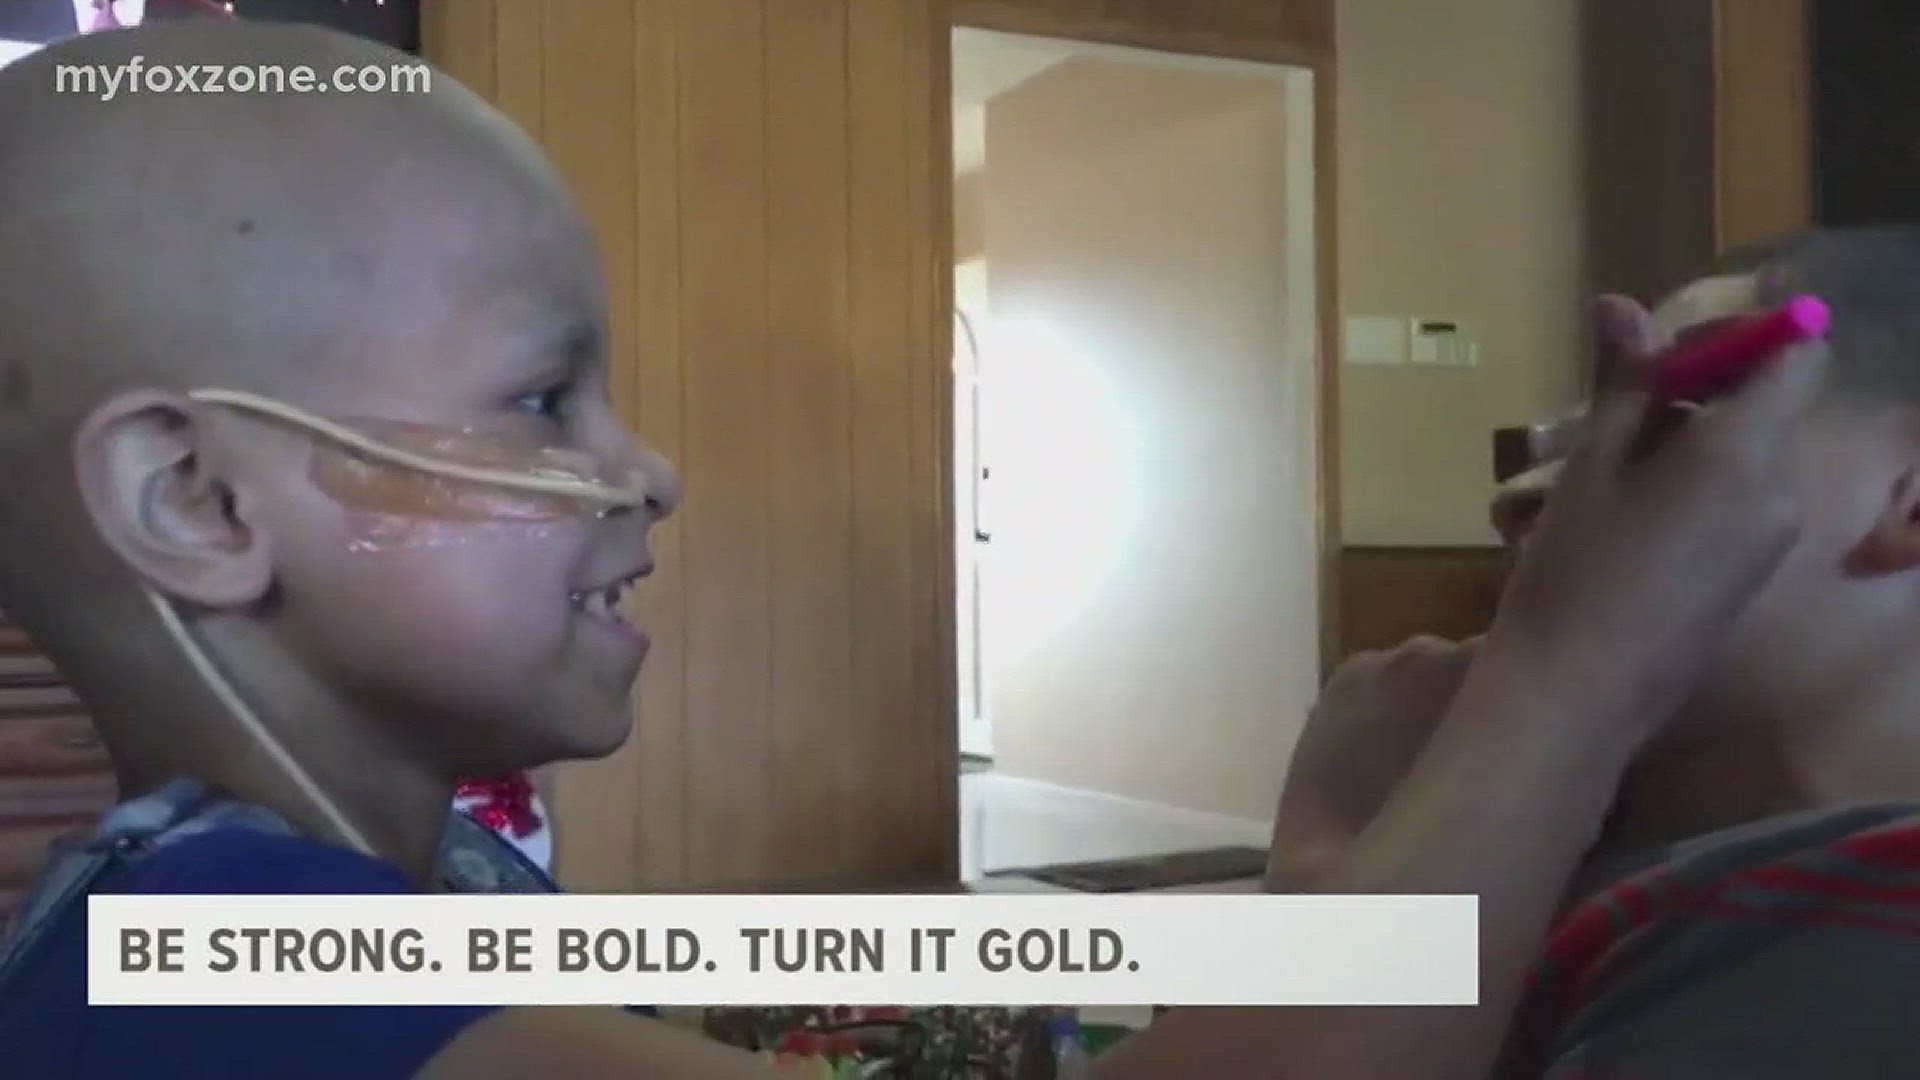 BE BRAVE. BE BOLD. TURN IT GOLD. 96% of the National Cancer Institute's budget goes toward funding adult cancer. ONLY 4% goes to children's cancer. Our Brenda Matute has the story.